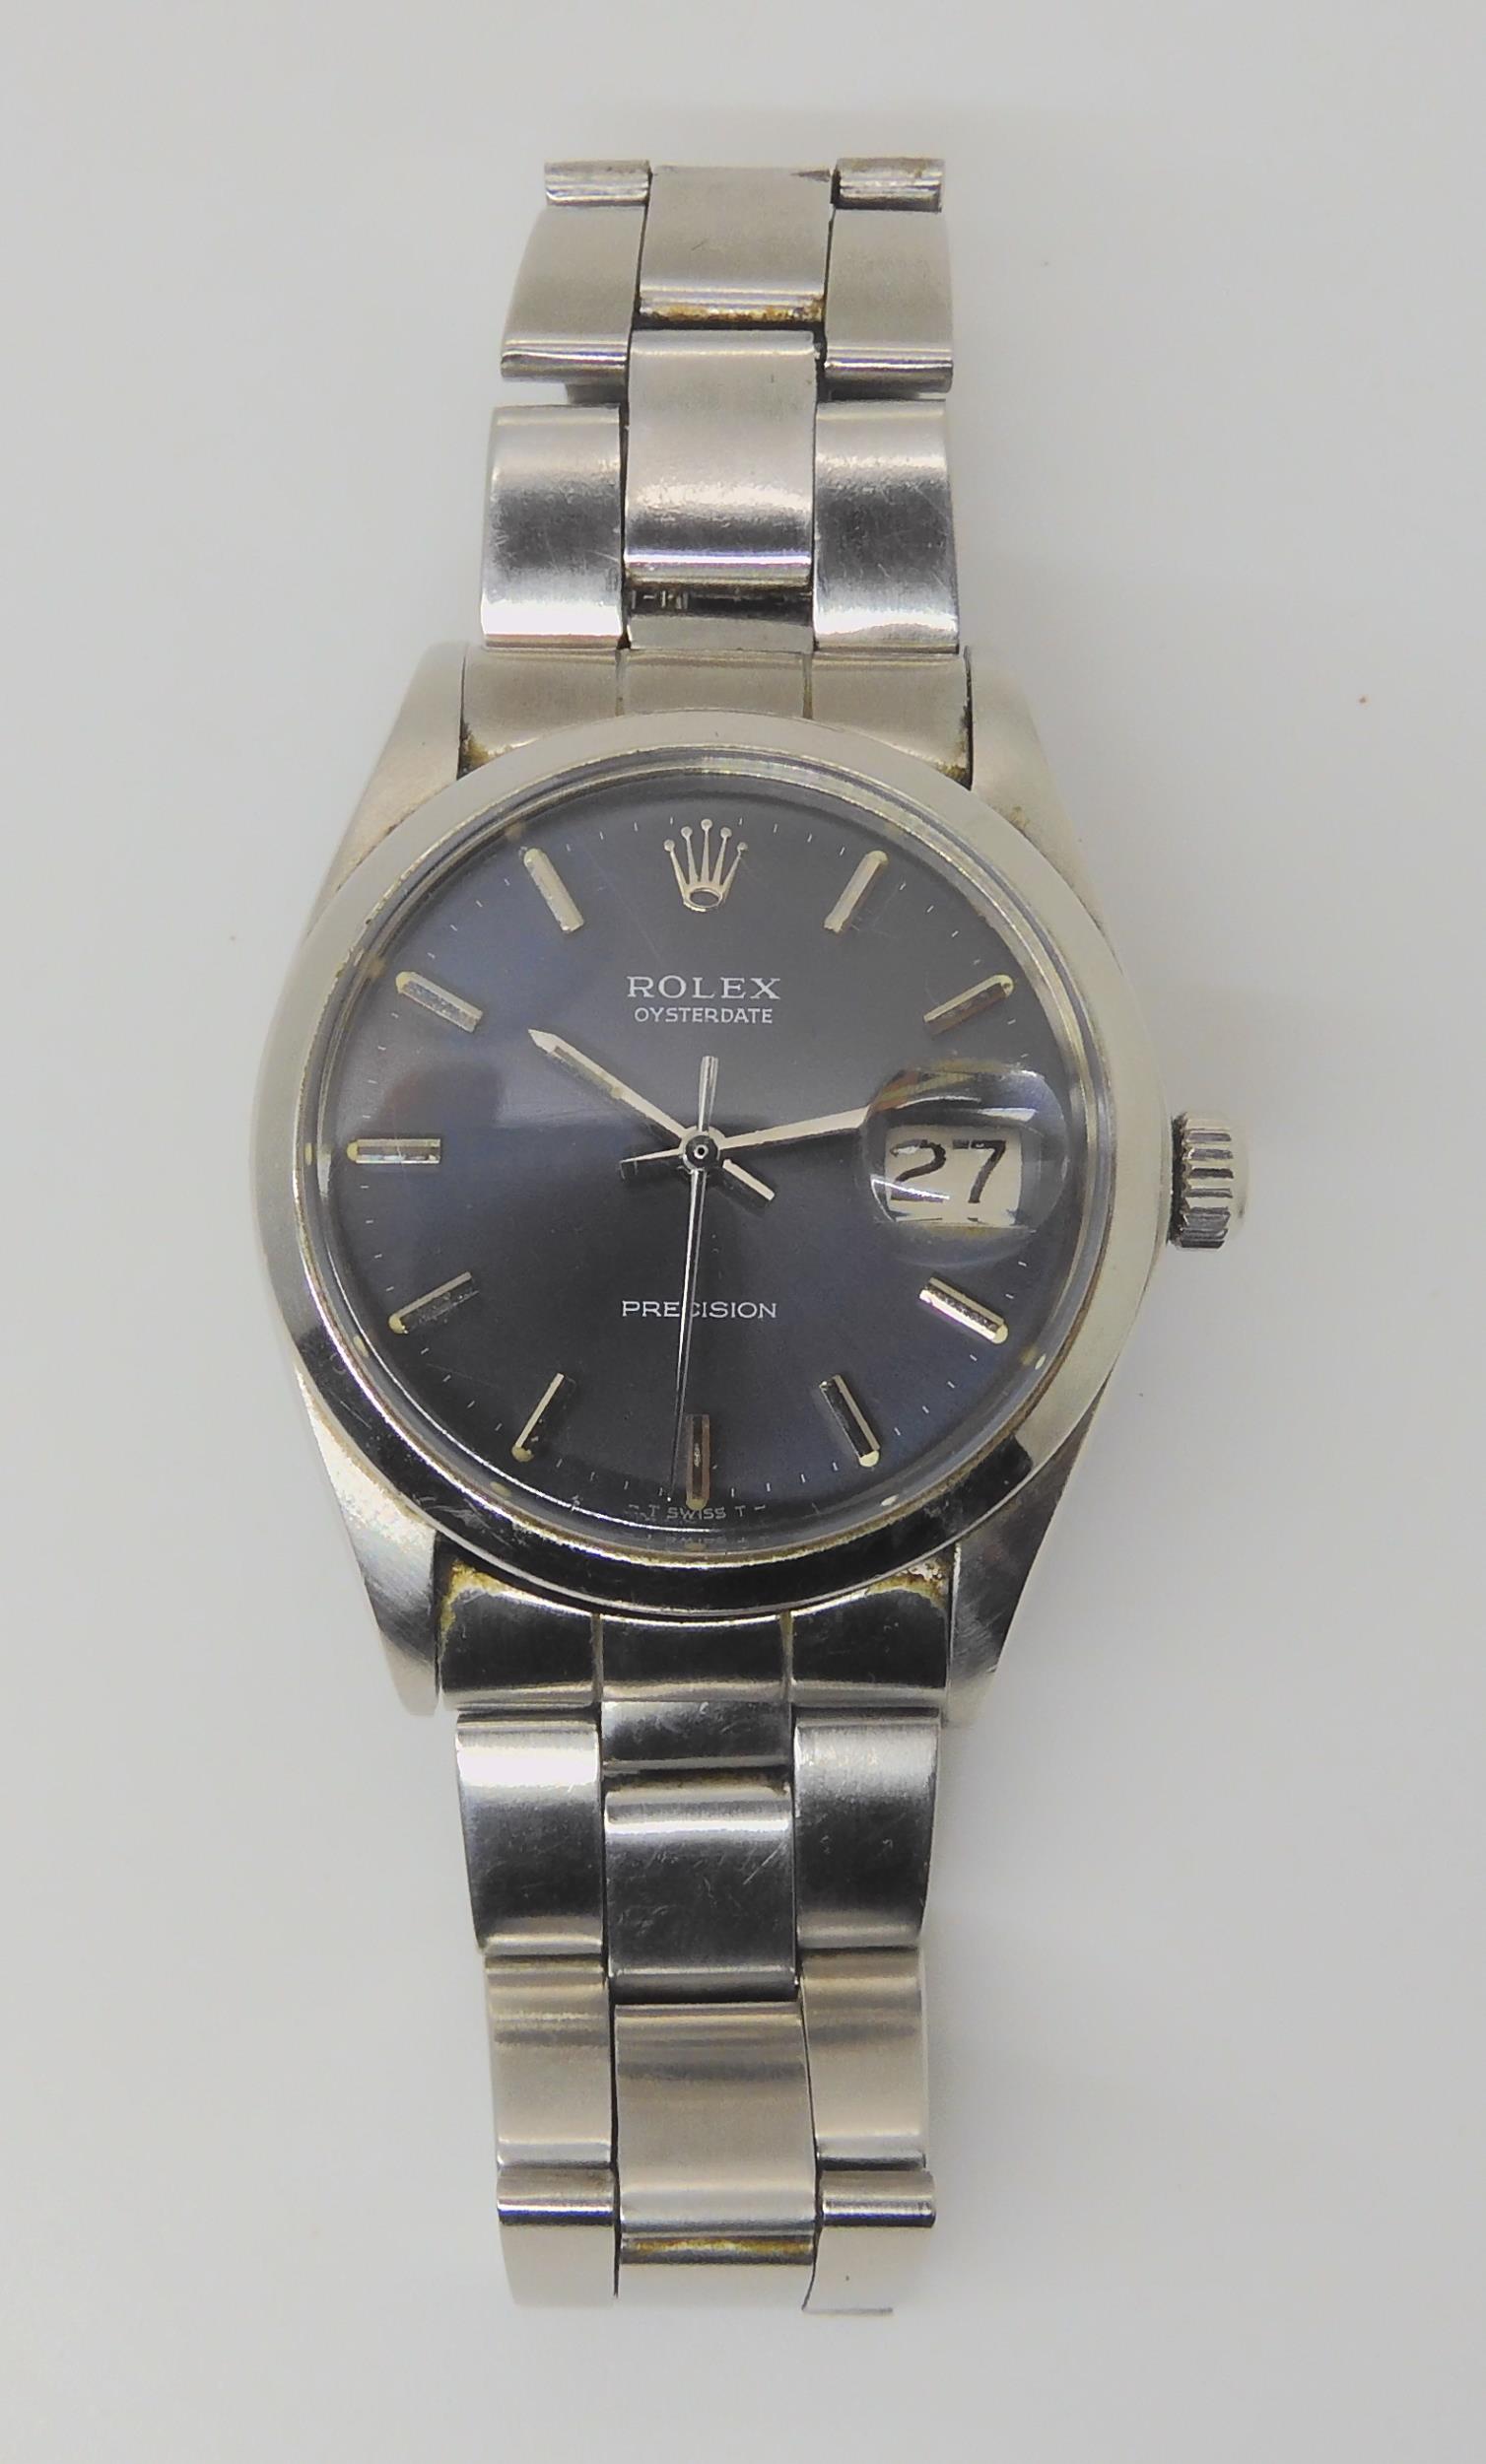 A ROLEX OYSTERDATE PRECISION with dark grey satined dial, silver coloured baton numerals, hands, and - Image 13 of 14